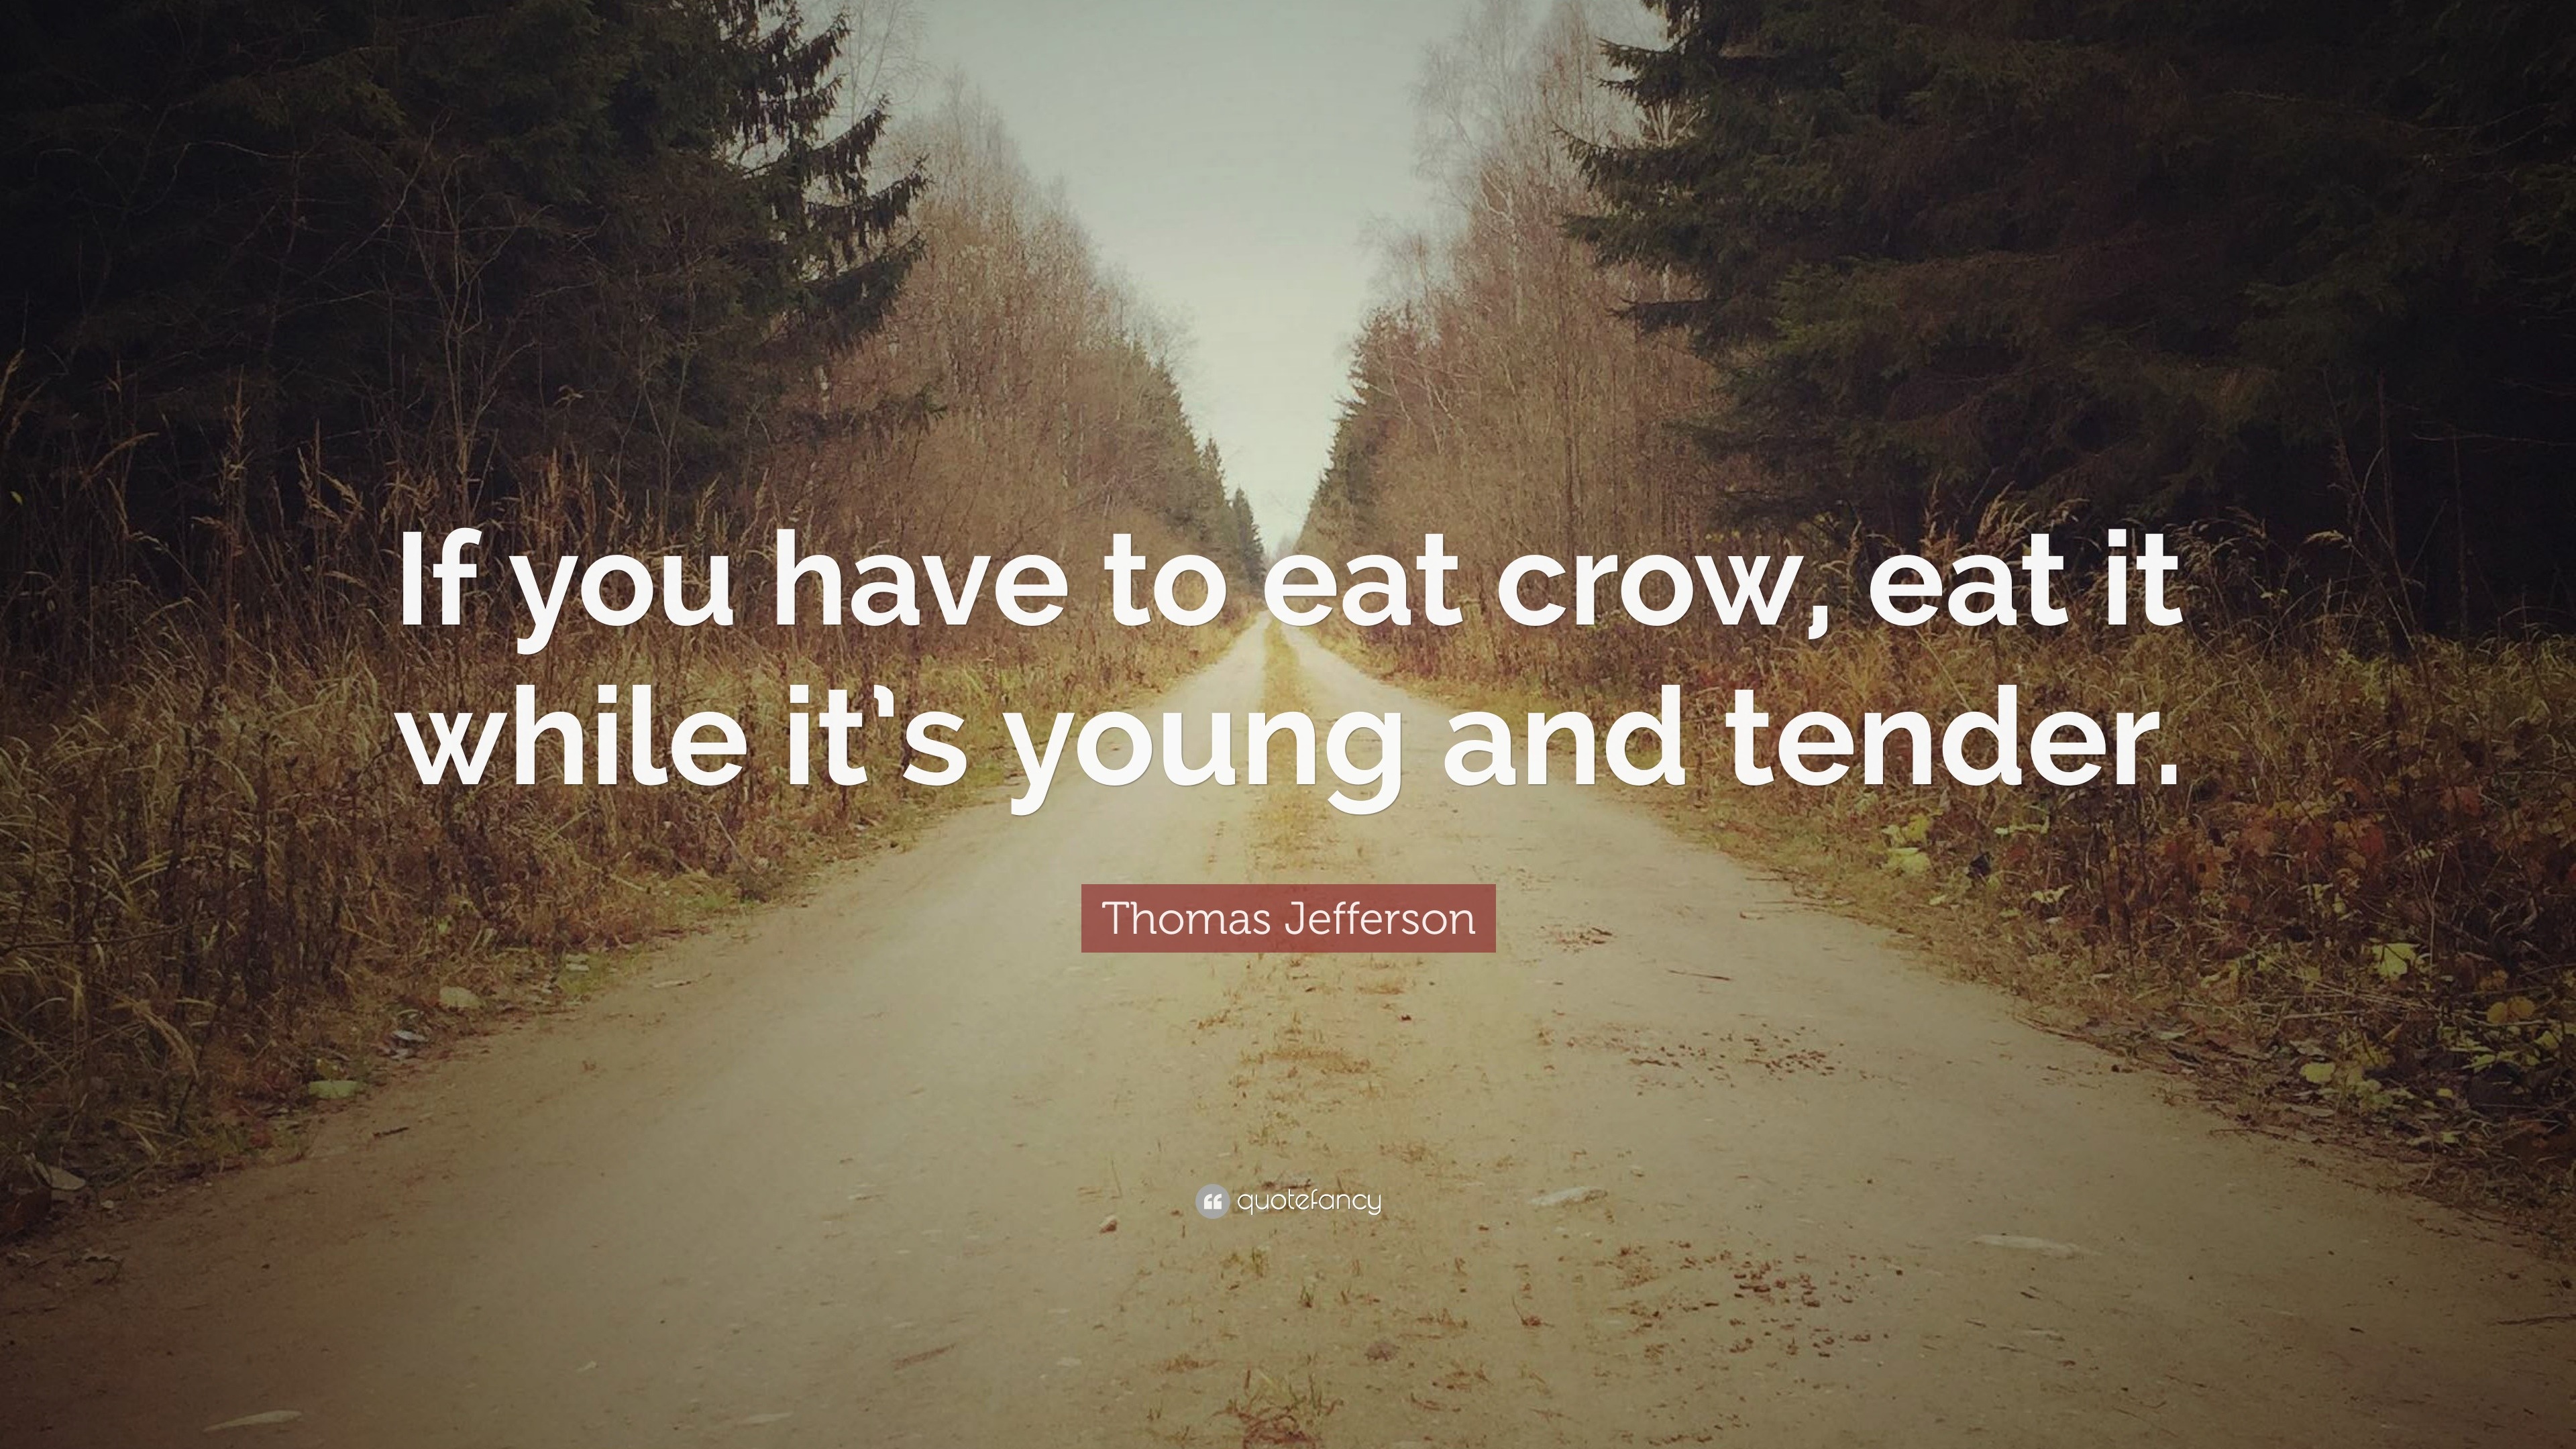 Thomas Jefferson Quote: “If you have to eat crow, eat it while it’s ...